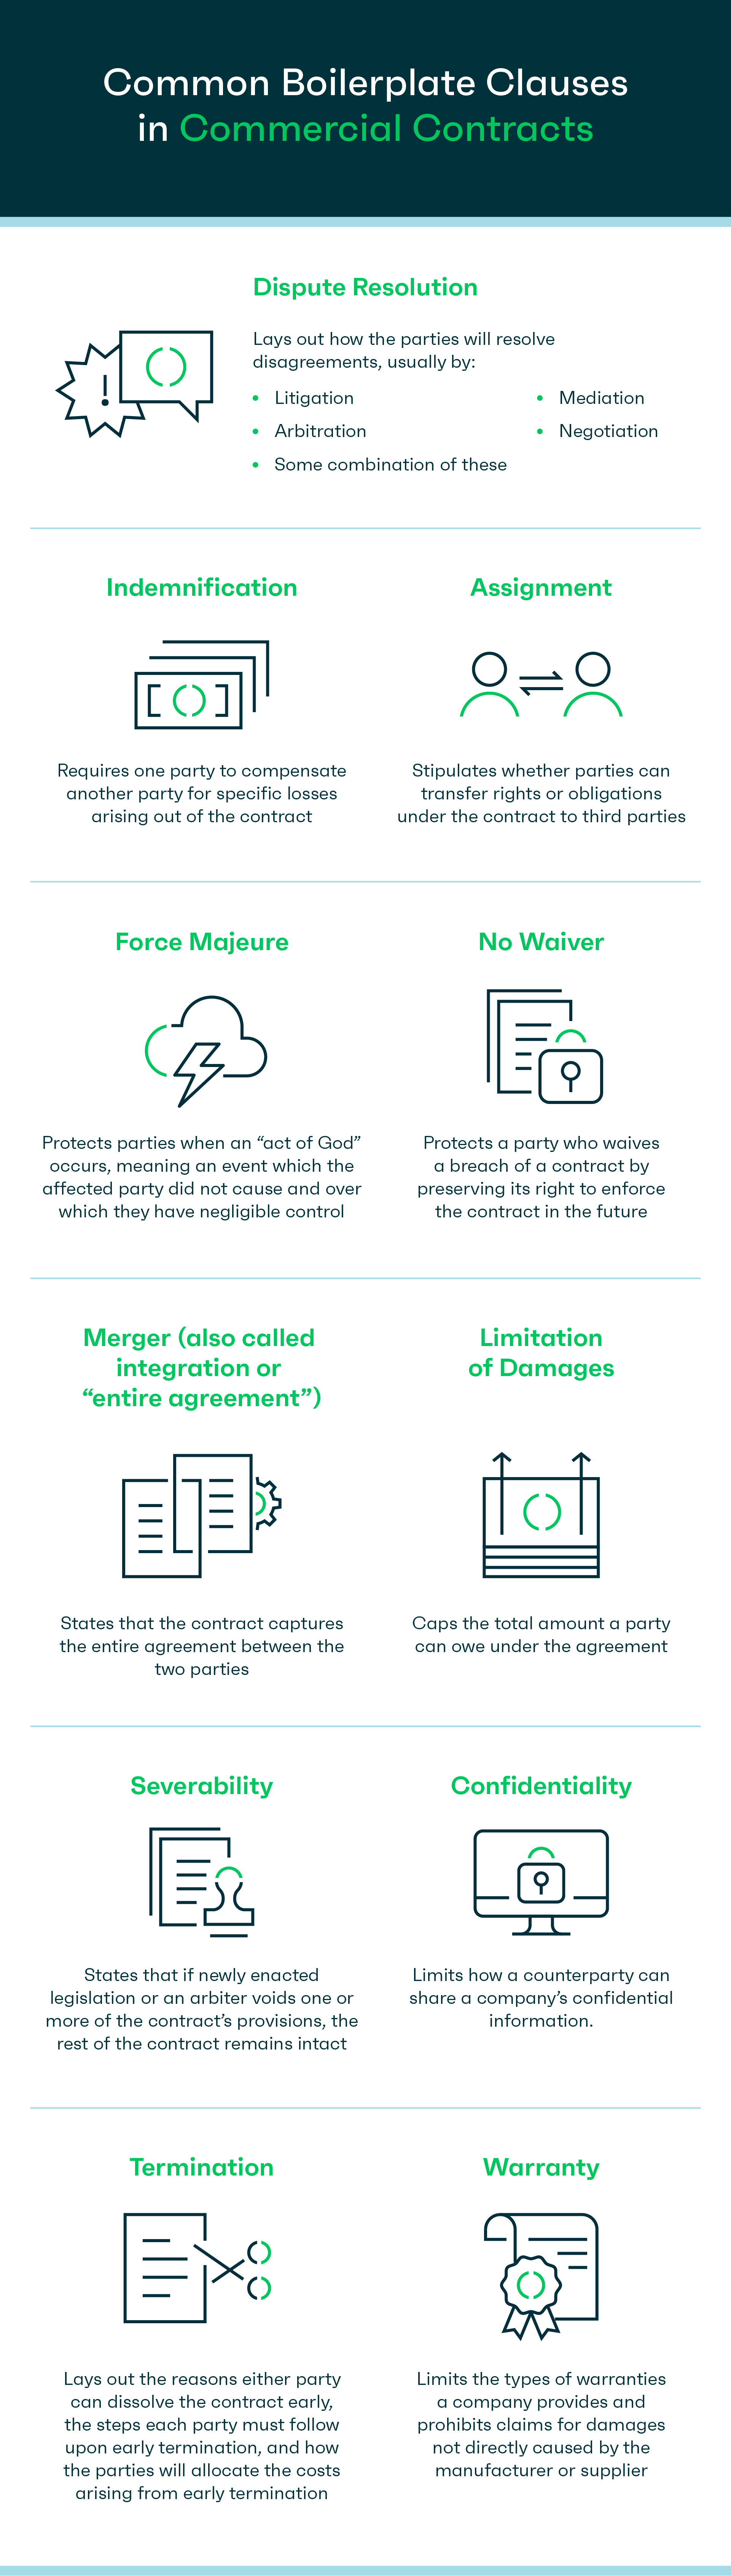 Common boilerplate clauses in commercial contracts - infographic